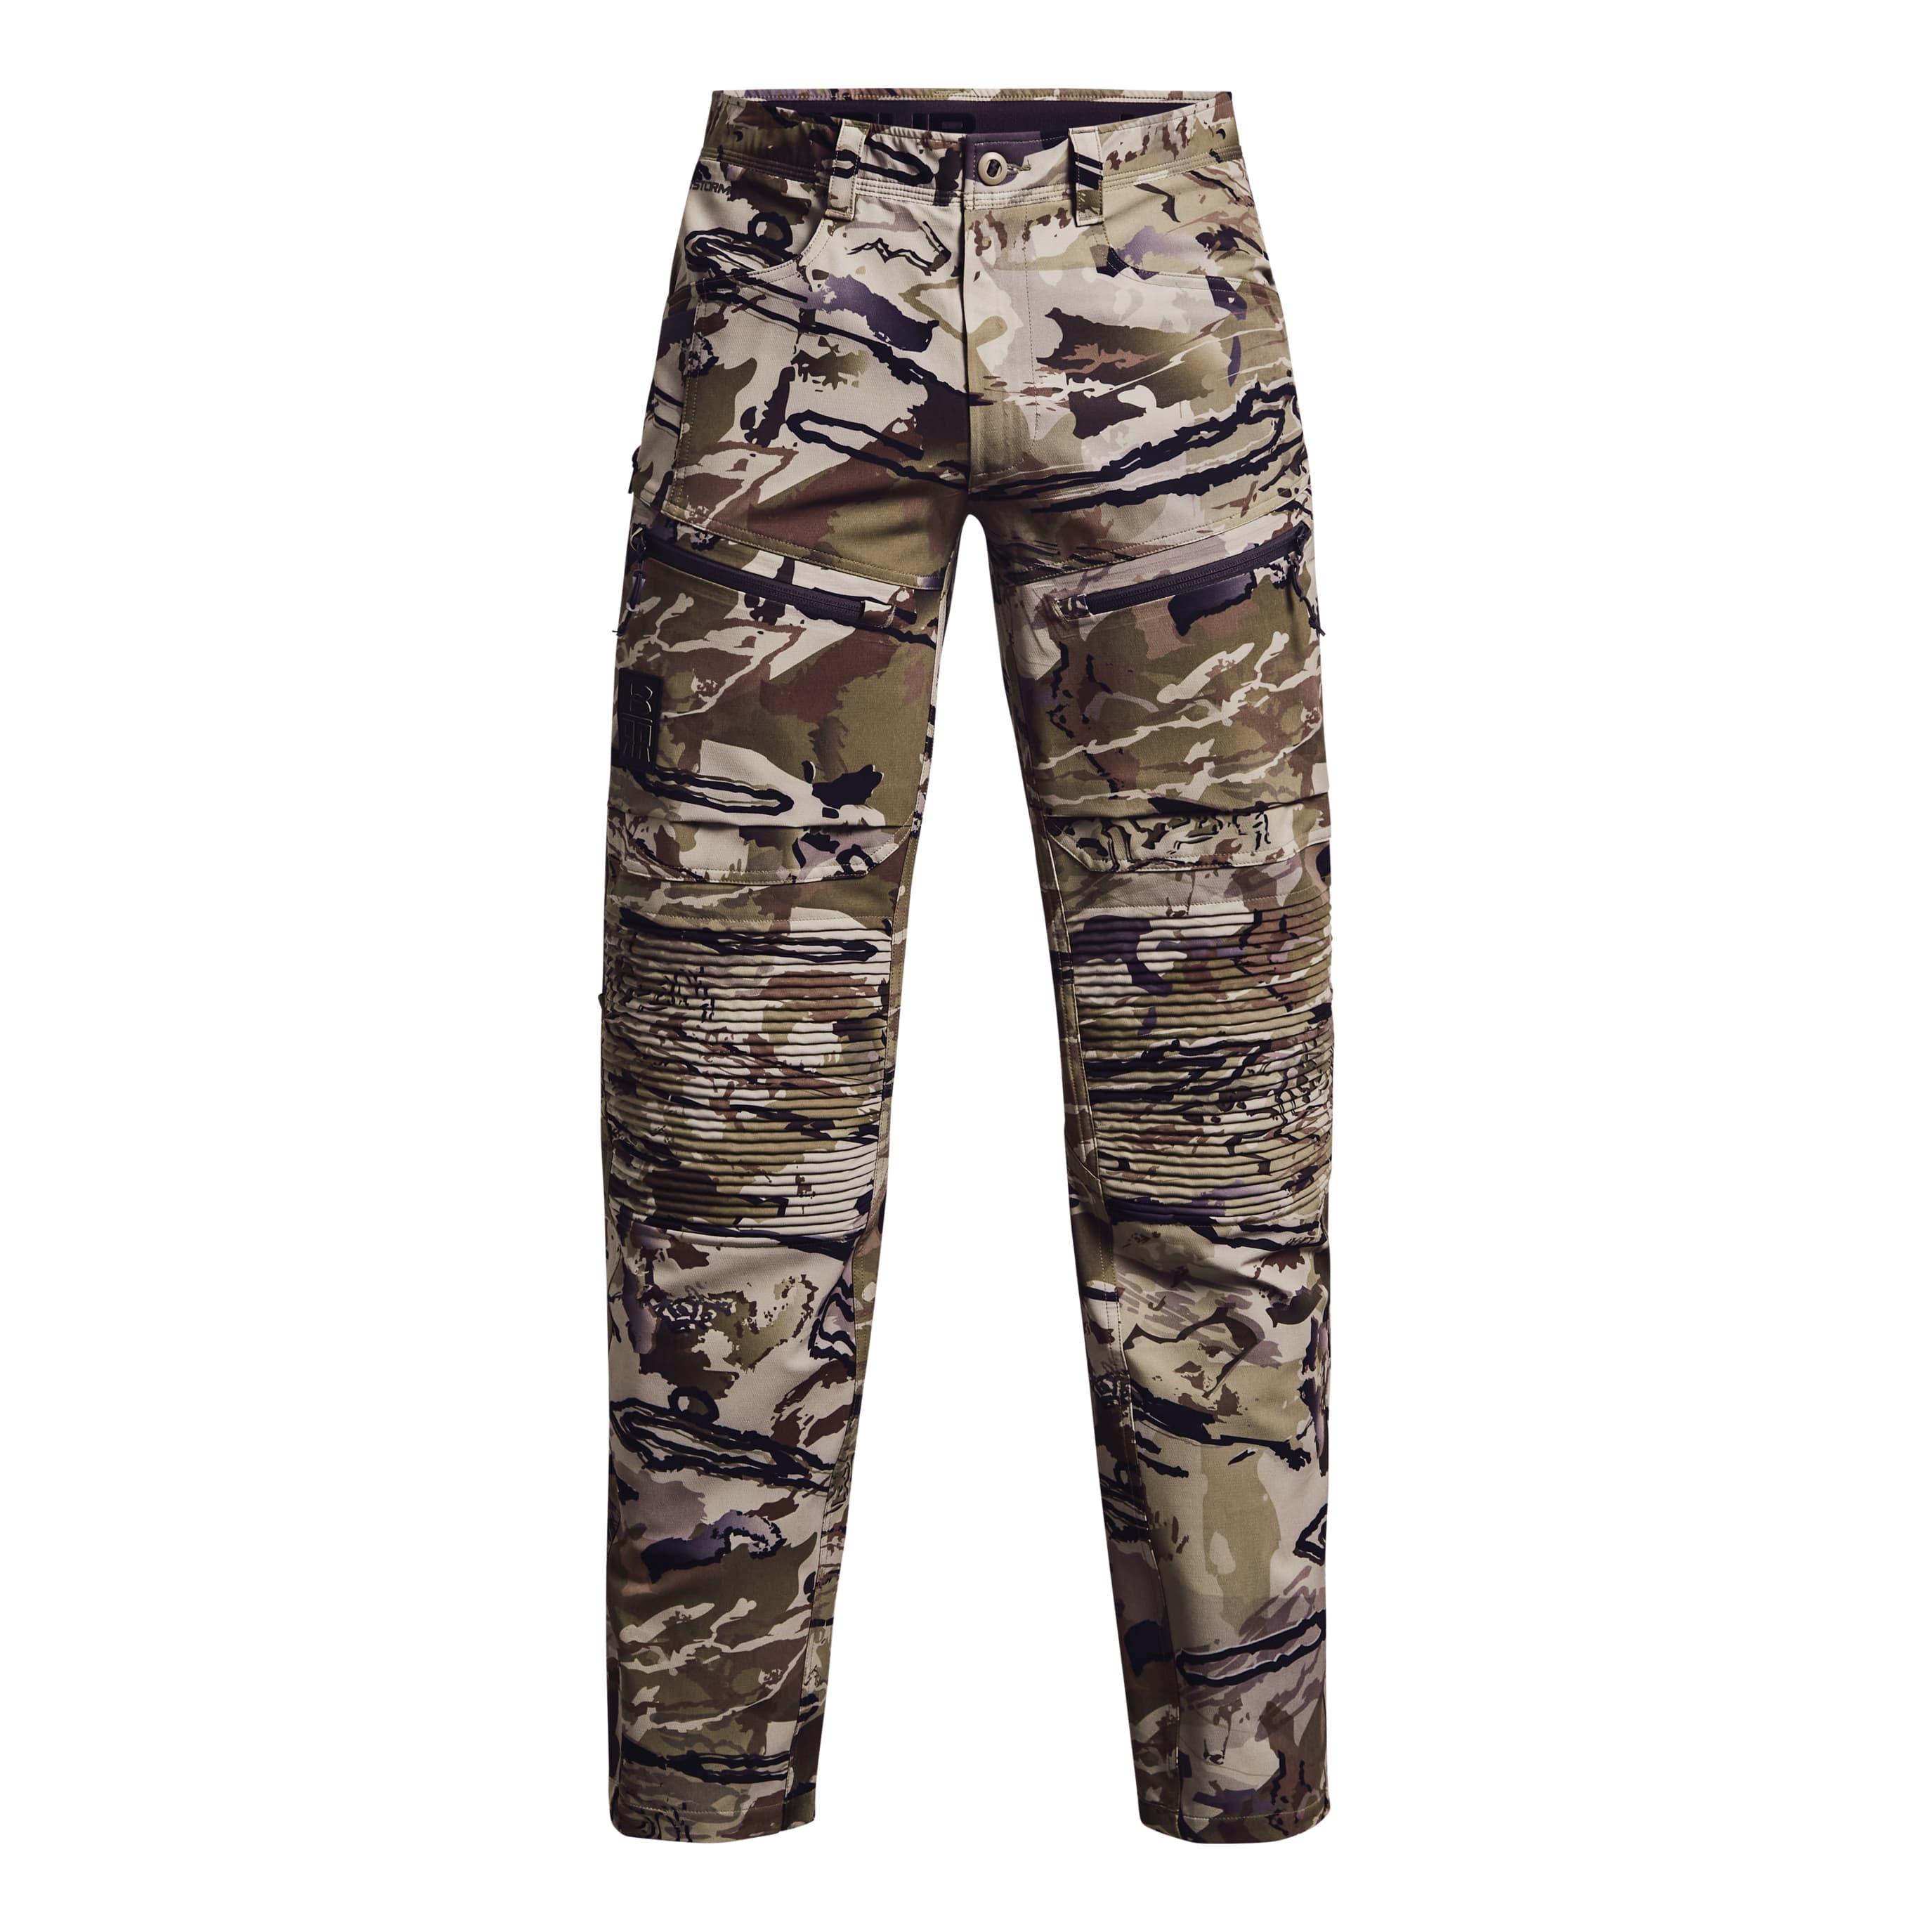 Under Armour sportstyle pique track pants in camo